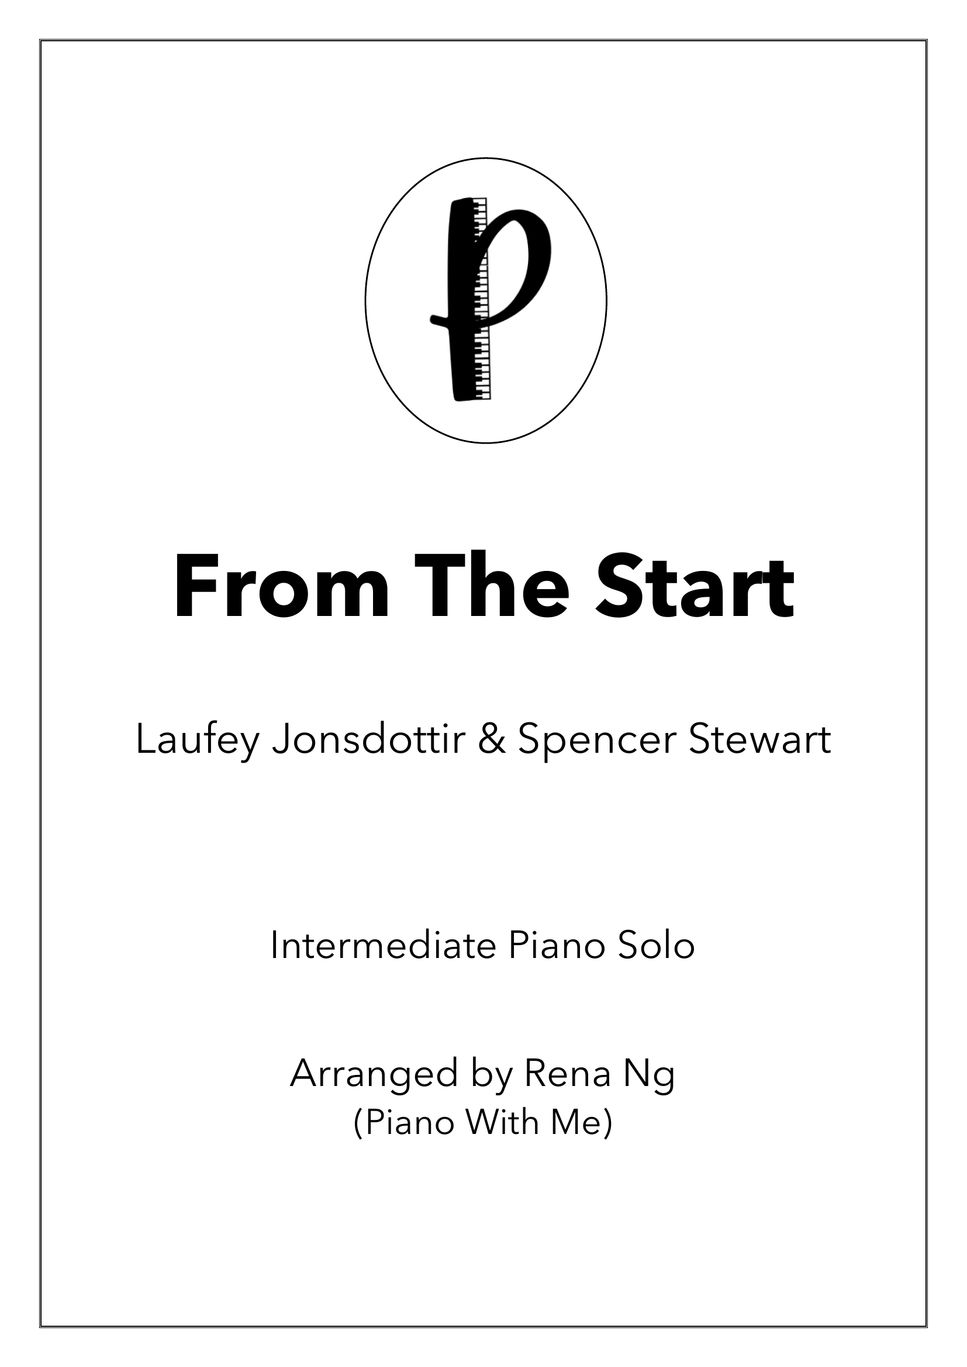 Laufey - From The Start (Piano Solo) by Piano With Me